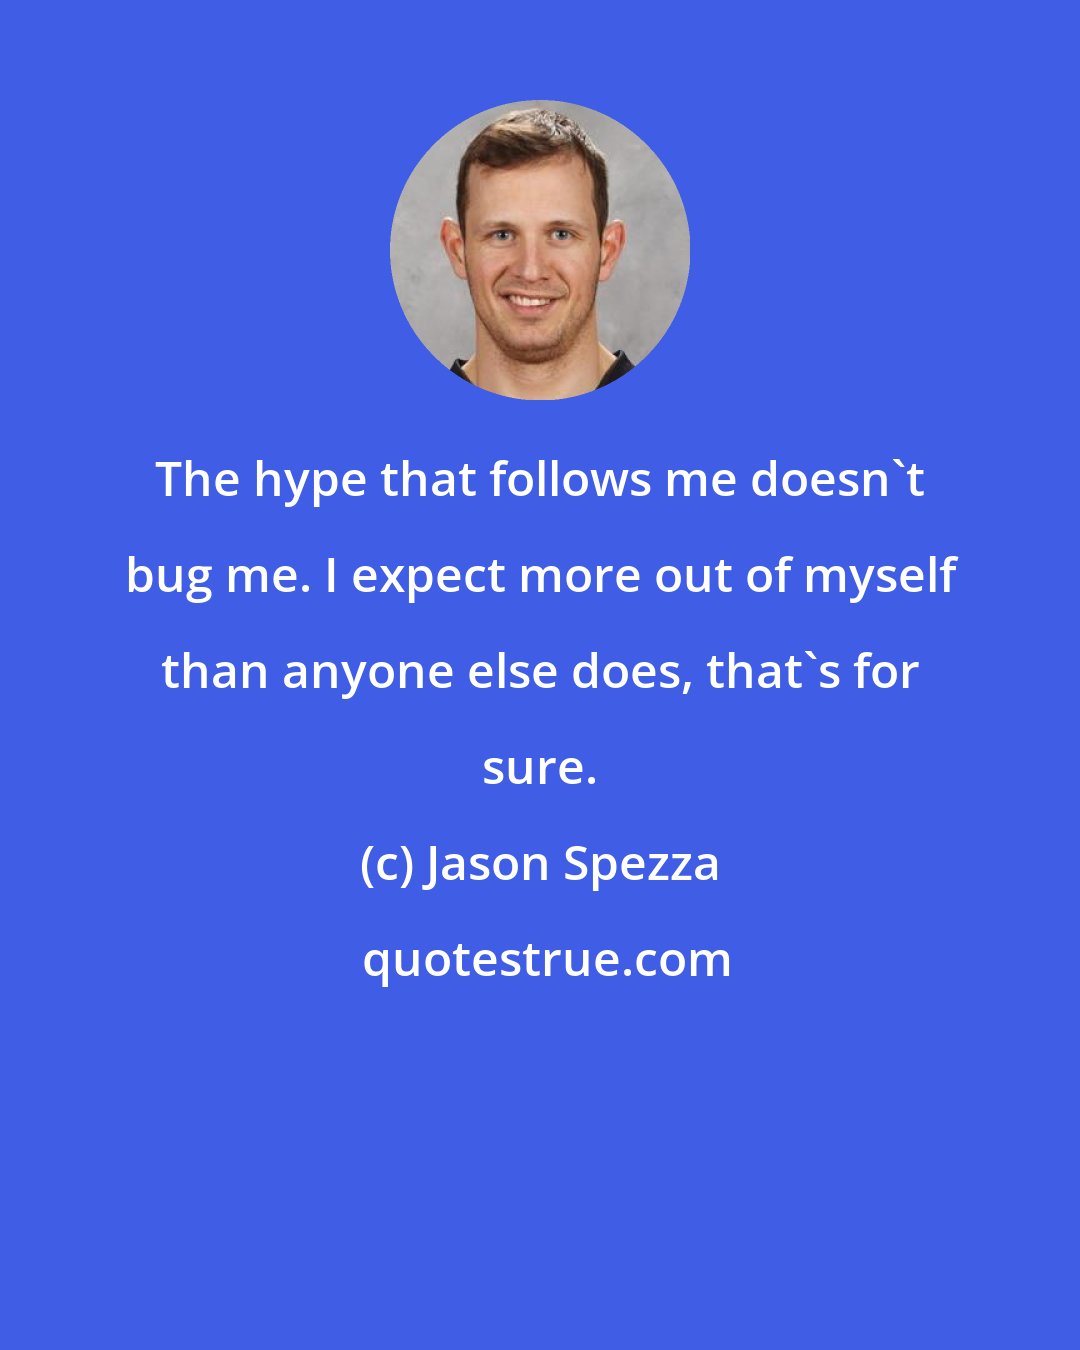 Jason Spezza: The hype that follows me doesn't bug me. I expect more out of myself than anyone else does, that's for sure.